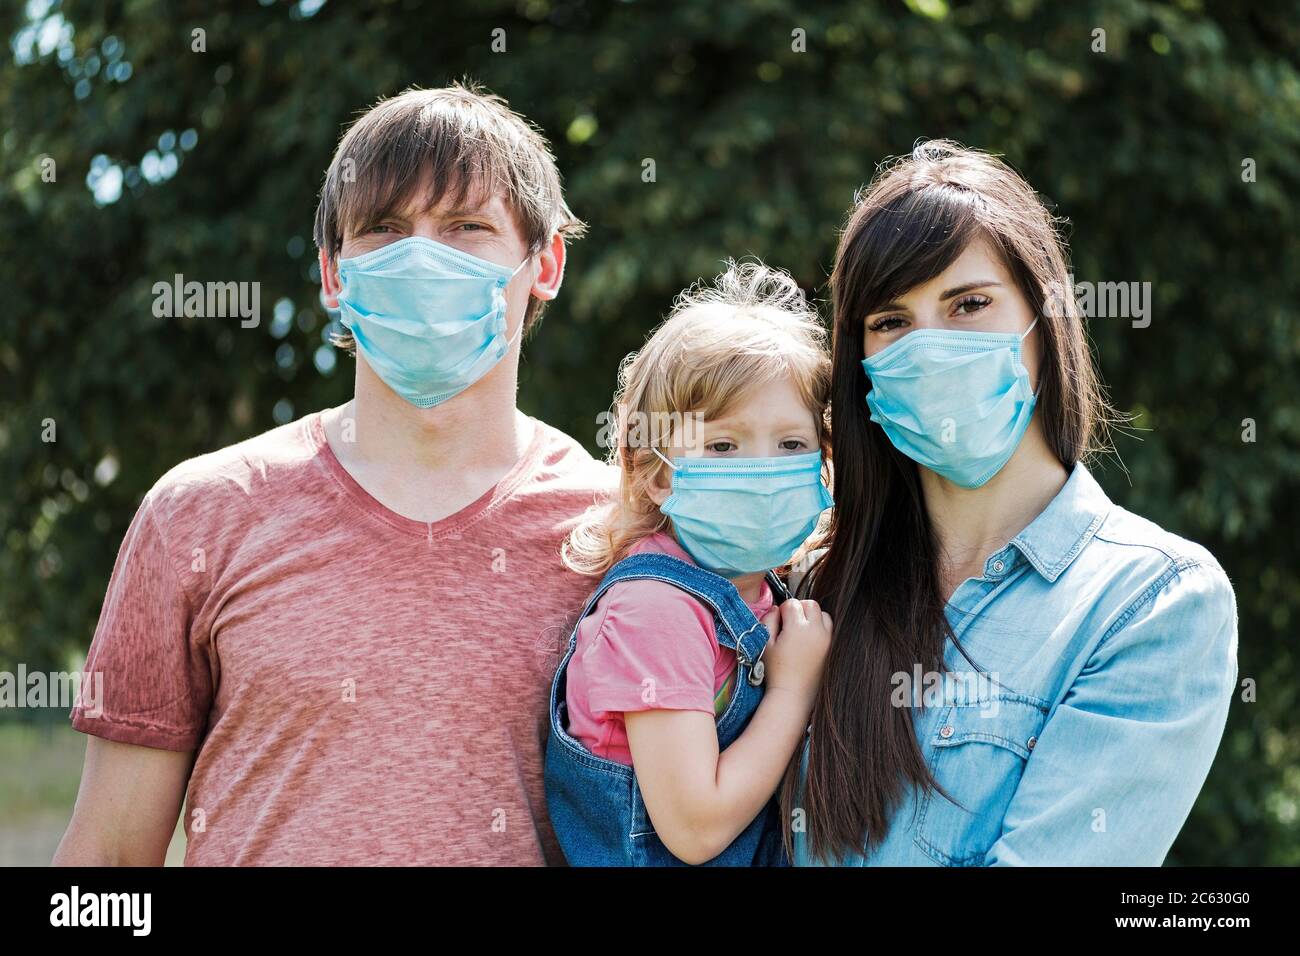 Young family with daughter wearing protective surgical face masks during the Covid-19 or coronavirus pandemic Stock Photo